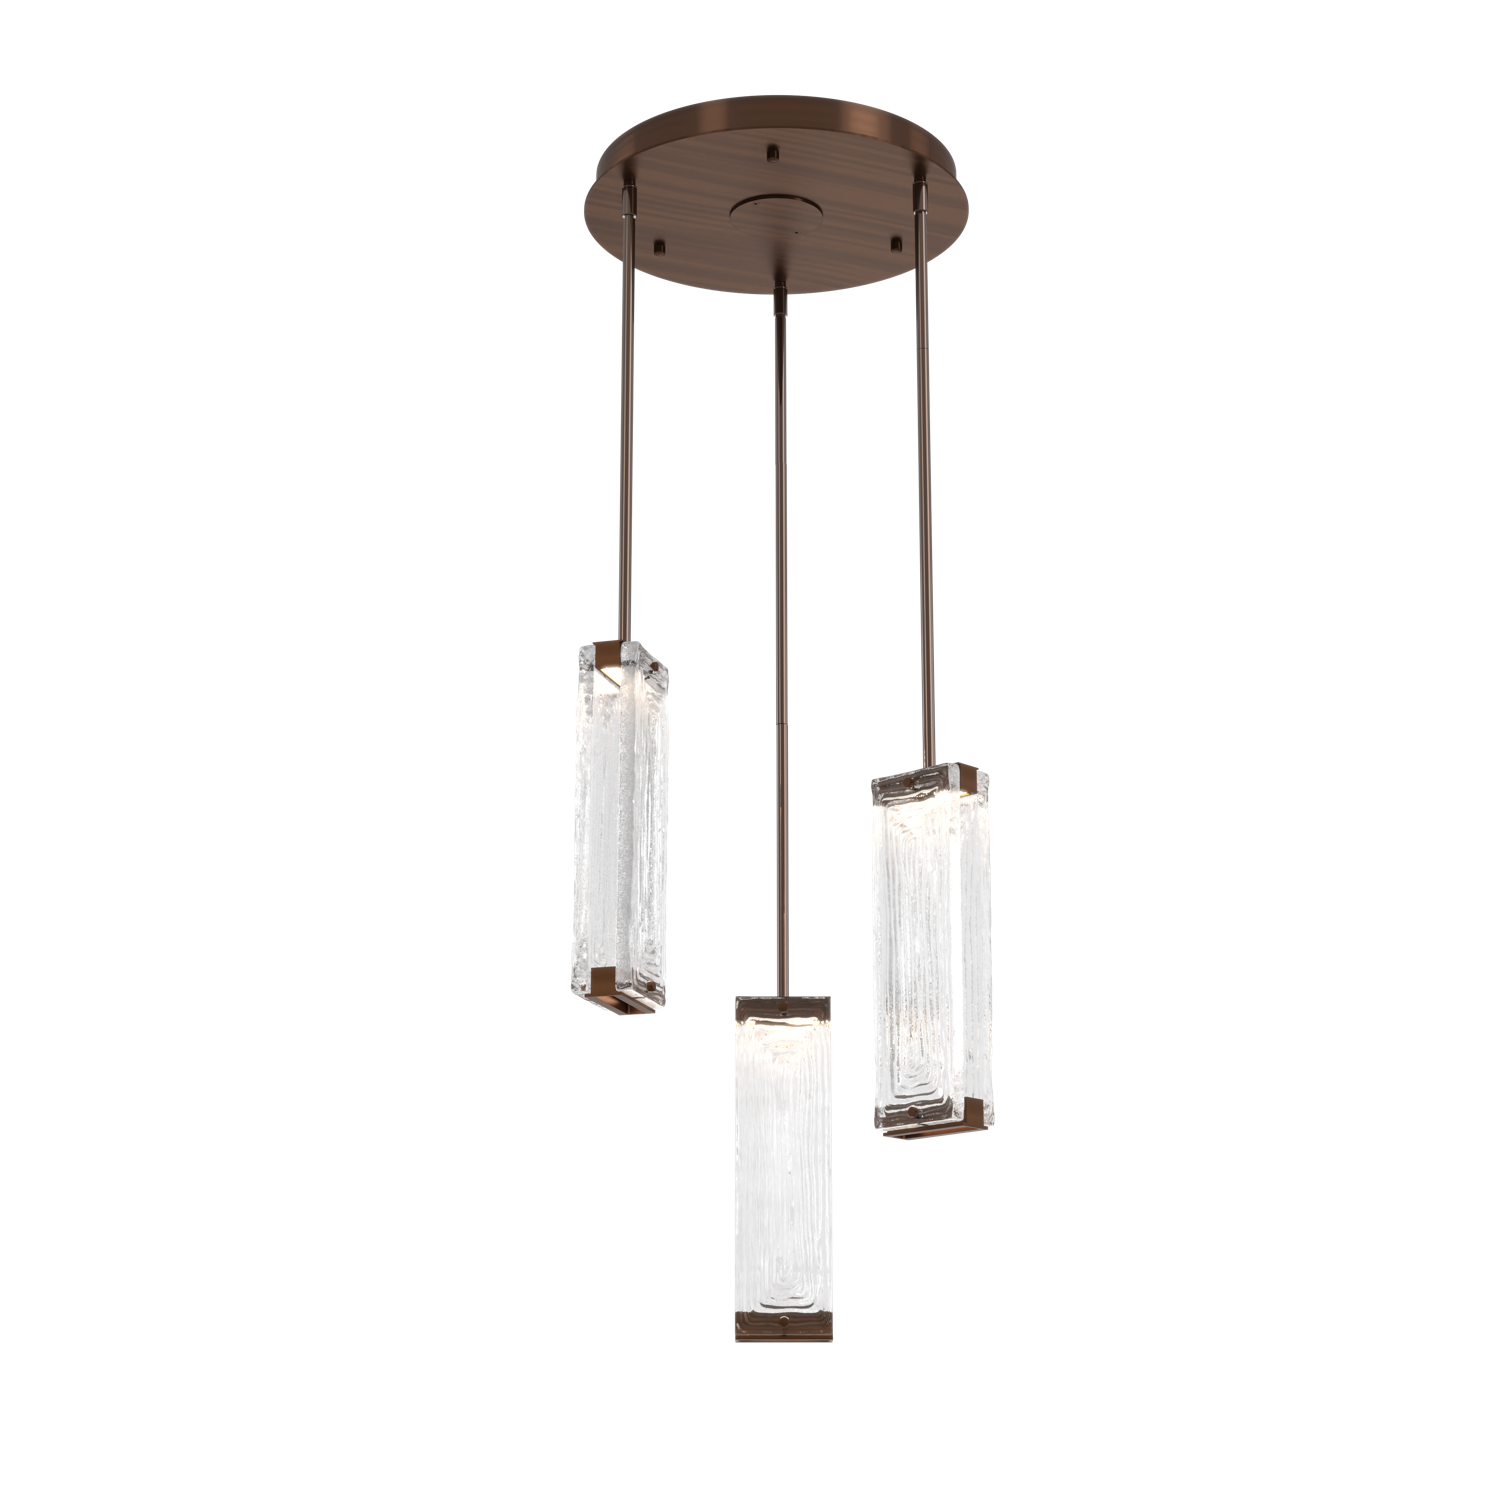 CHB0090-03-RB-TL-Hammerton-Studio-Tabulo-3-light-multi-pendant-chandelier-with-oil-rubbed-bronze-finish-and-clear-linea-cast-glass-shade-and-LED-lamping